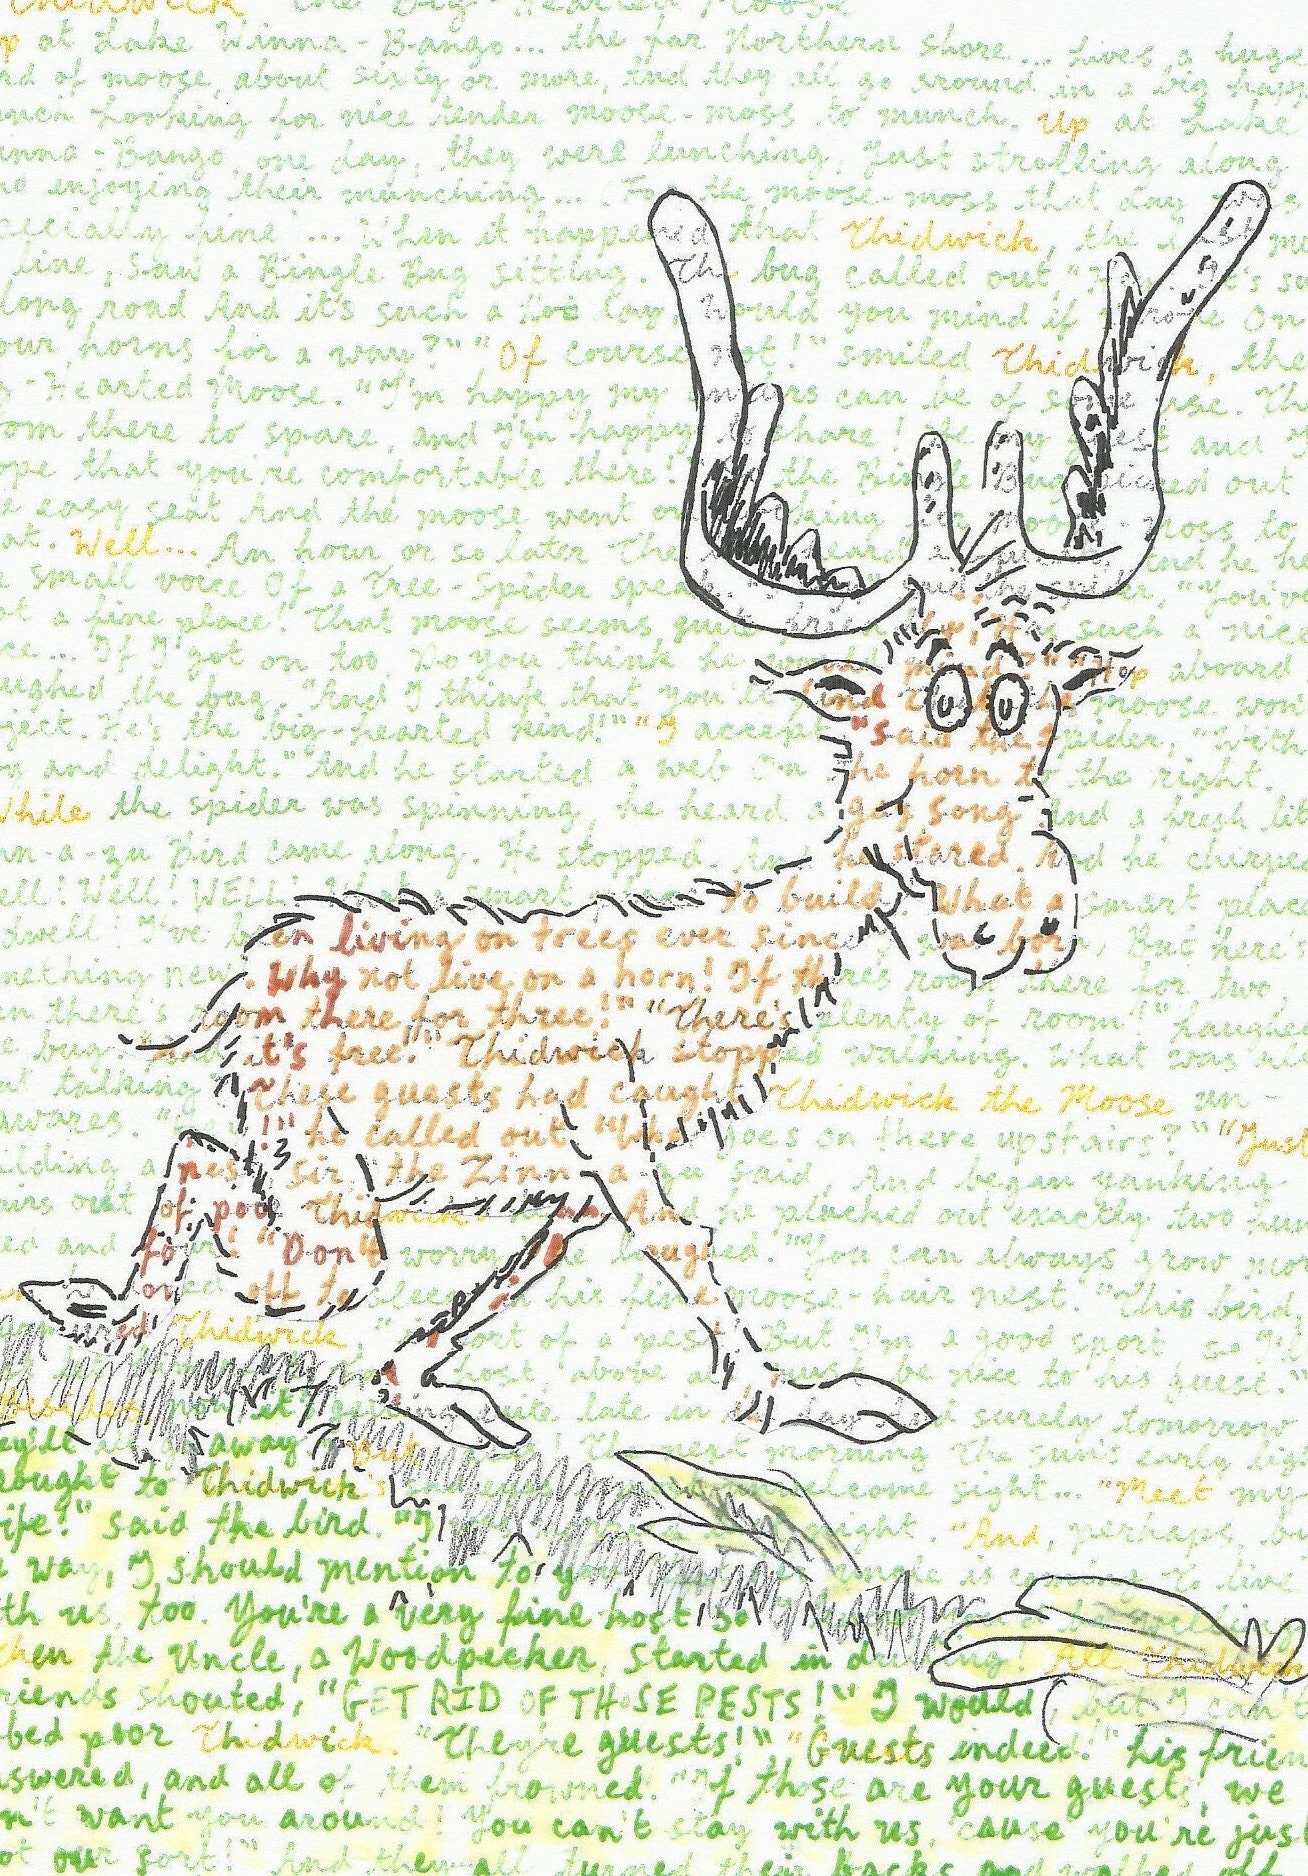 Canadian Moose Porn - Thidwick the Kind-hearted Moose a Story Poster Based on the - Etsy